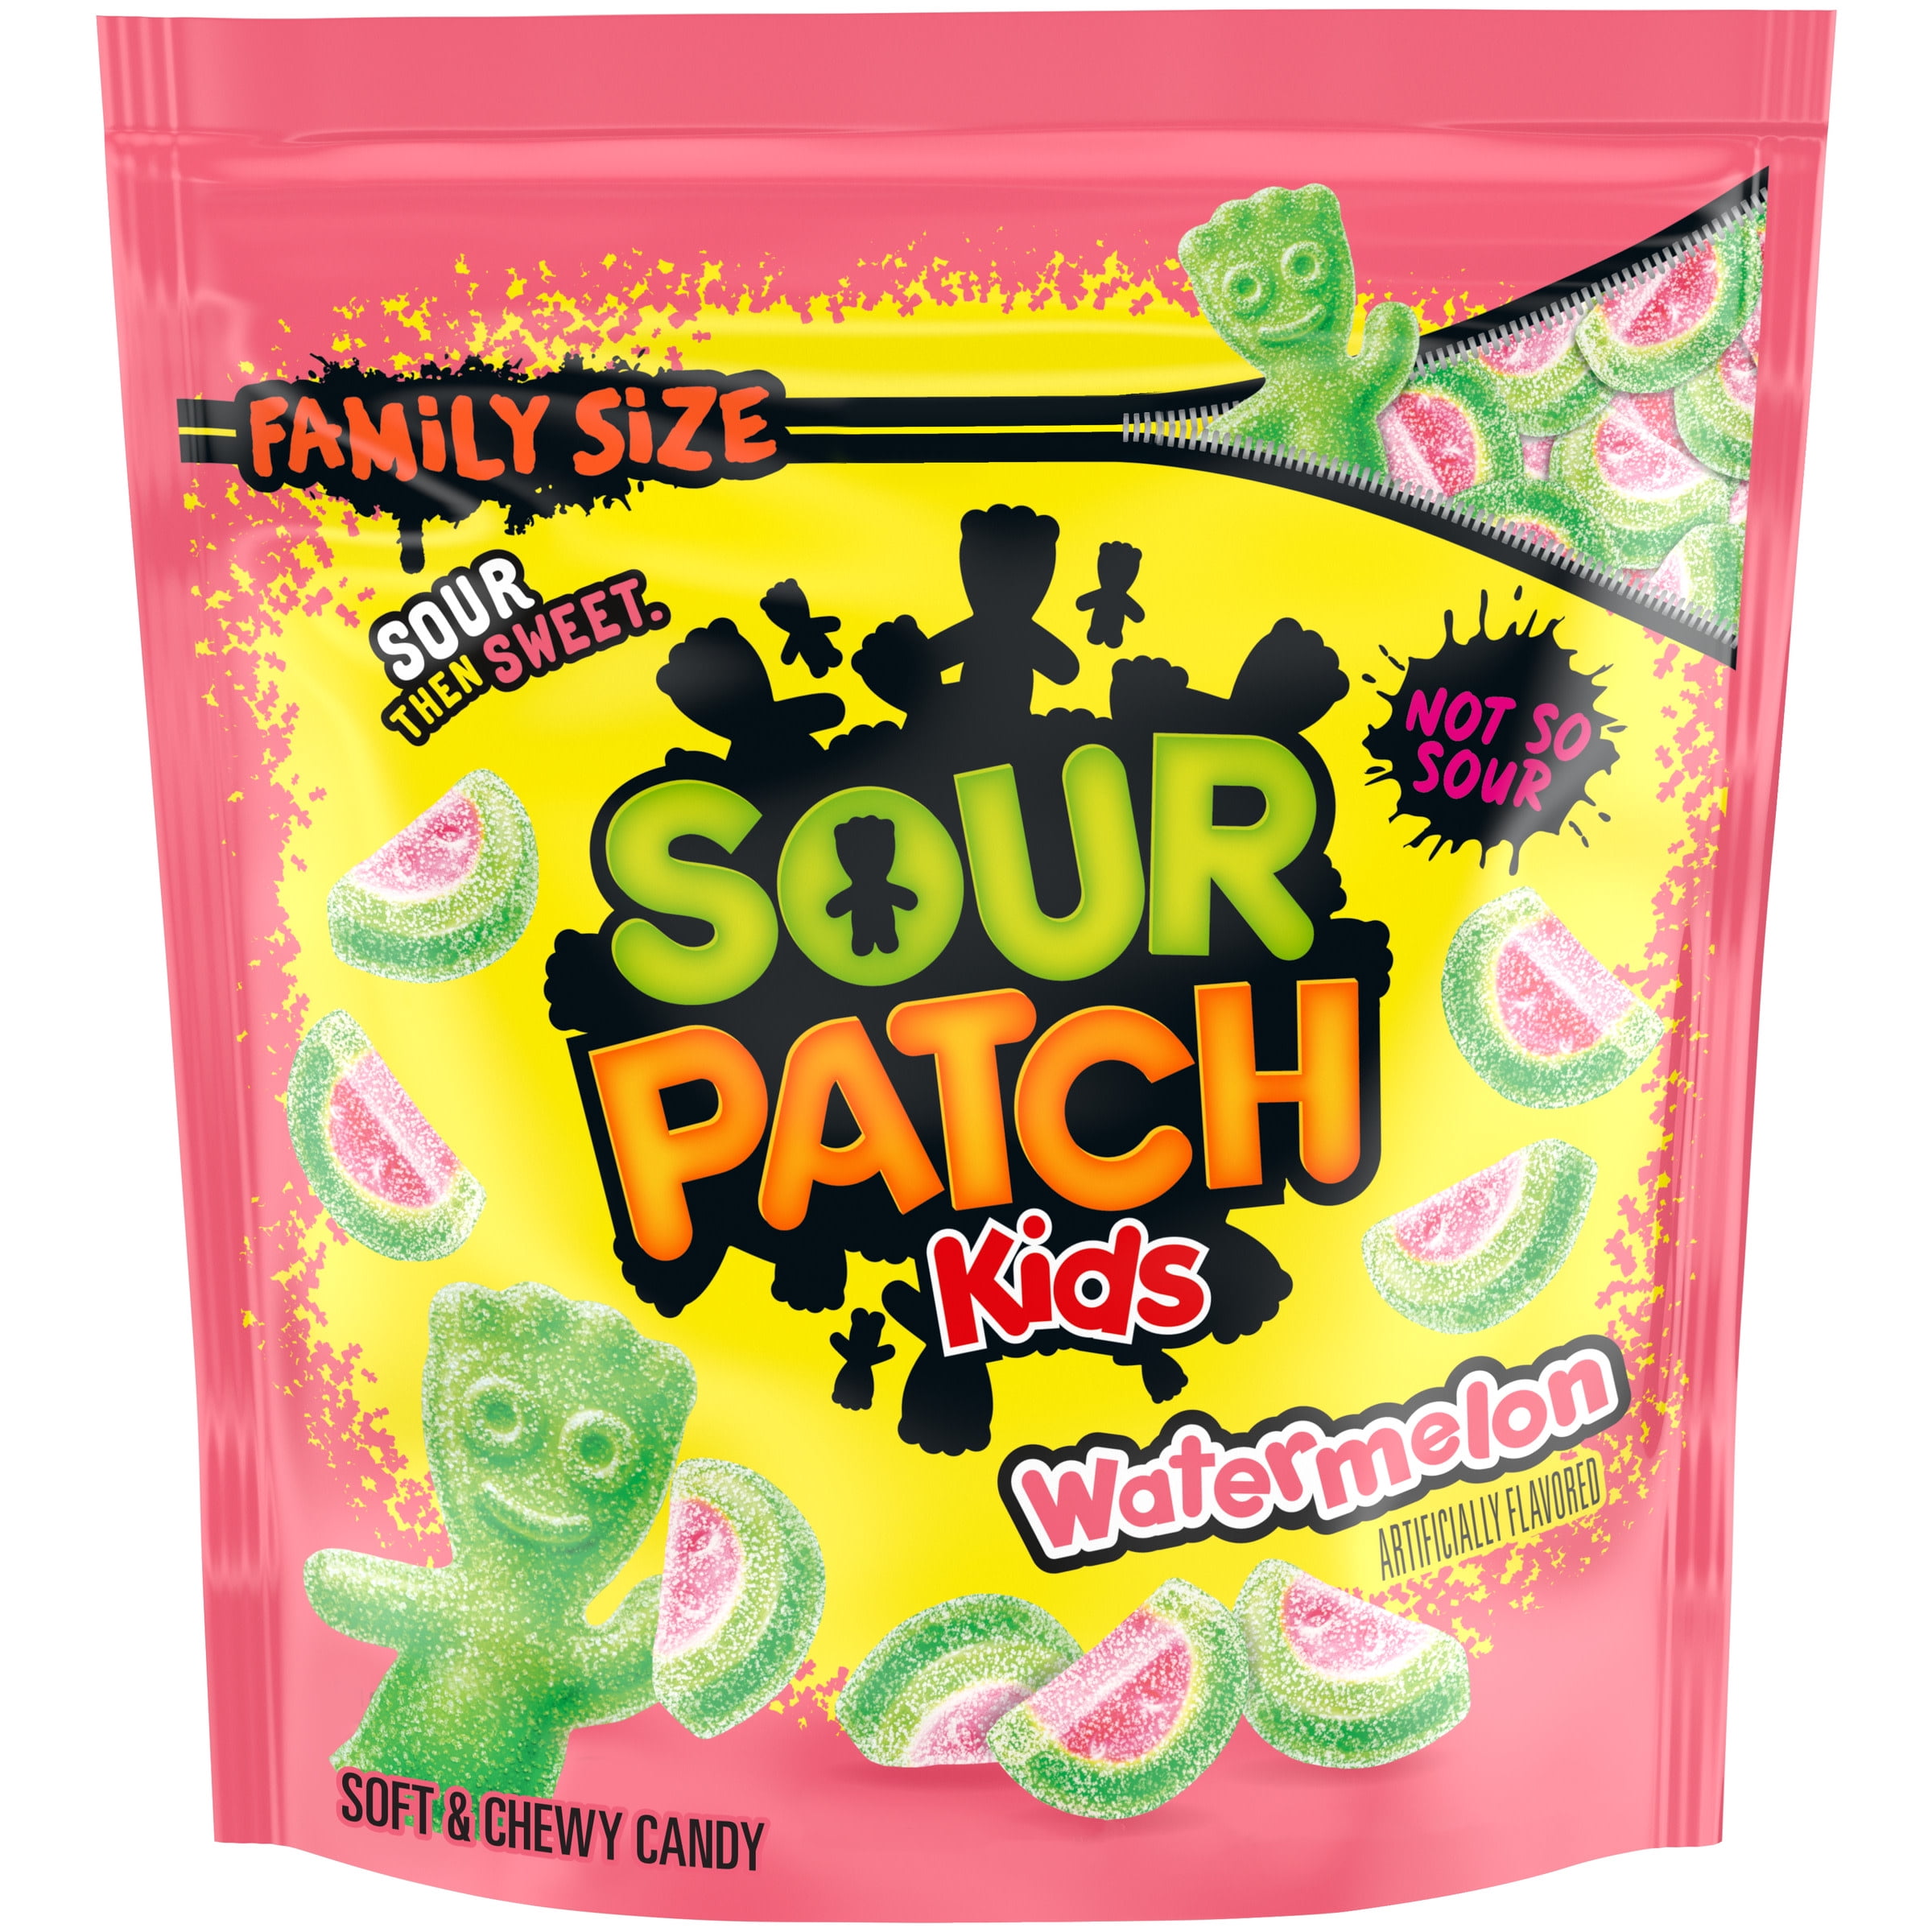 SOUR PATCH KIDS Watermelon Soft & Chewy Candy, Easter Candy, Family Size, 1.8 lb Bag